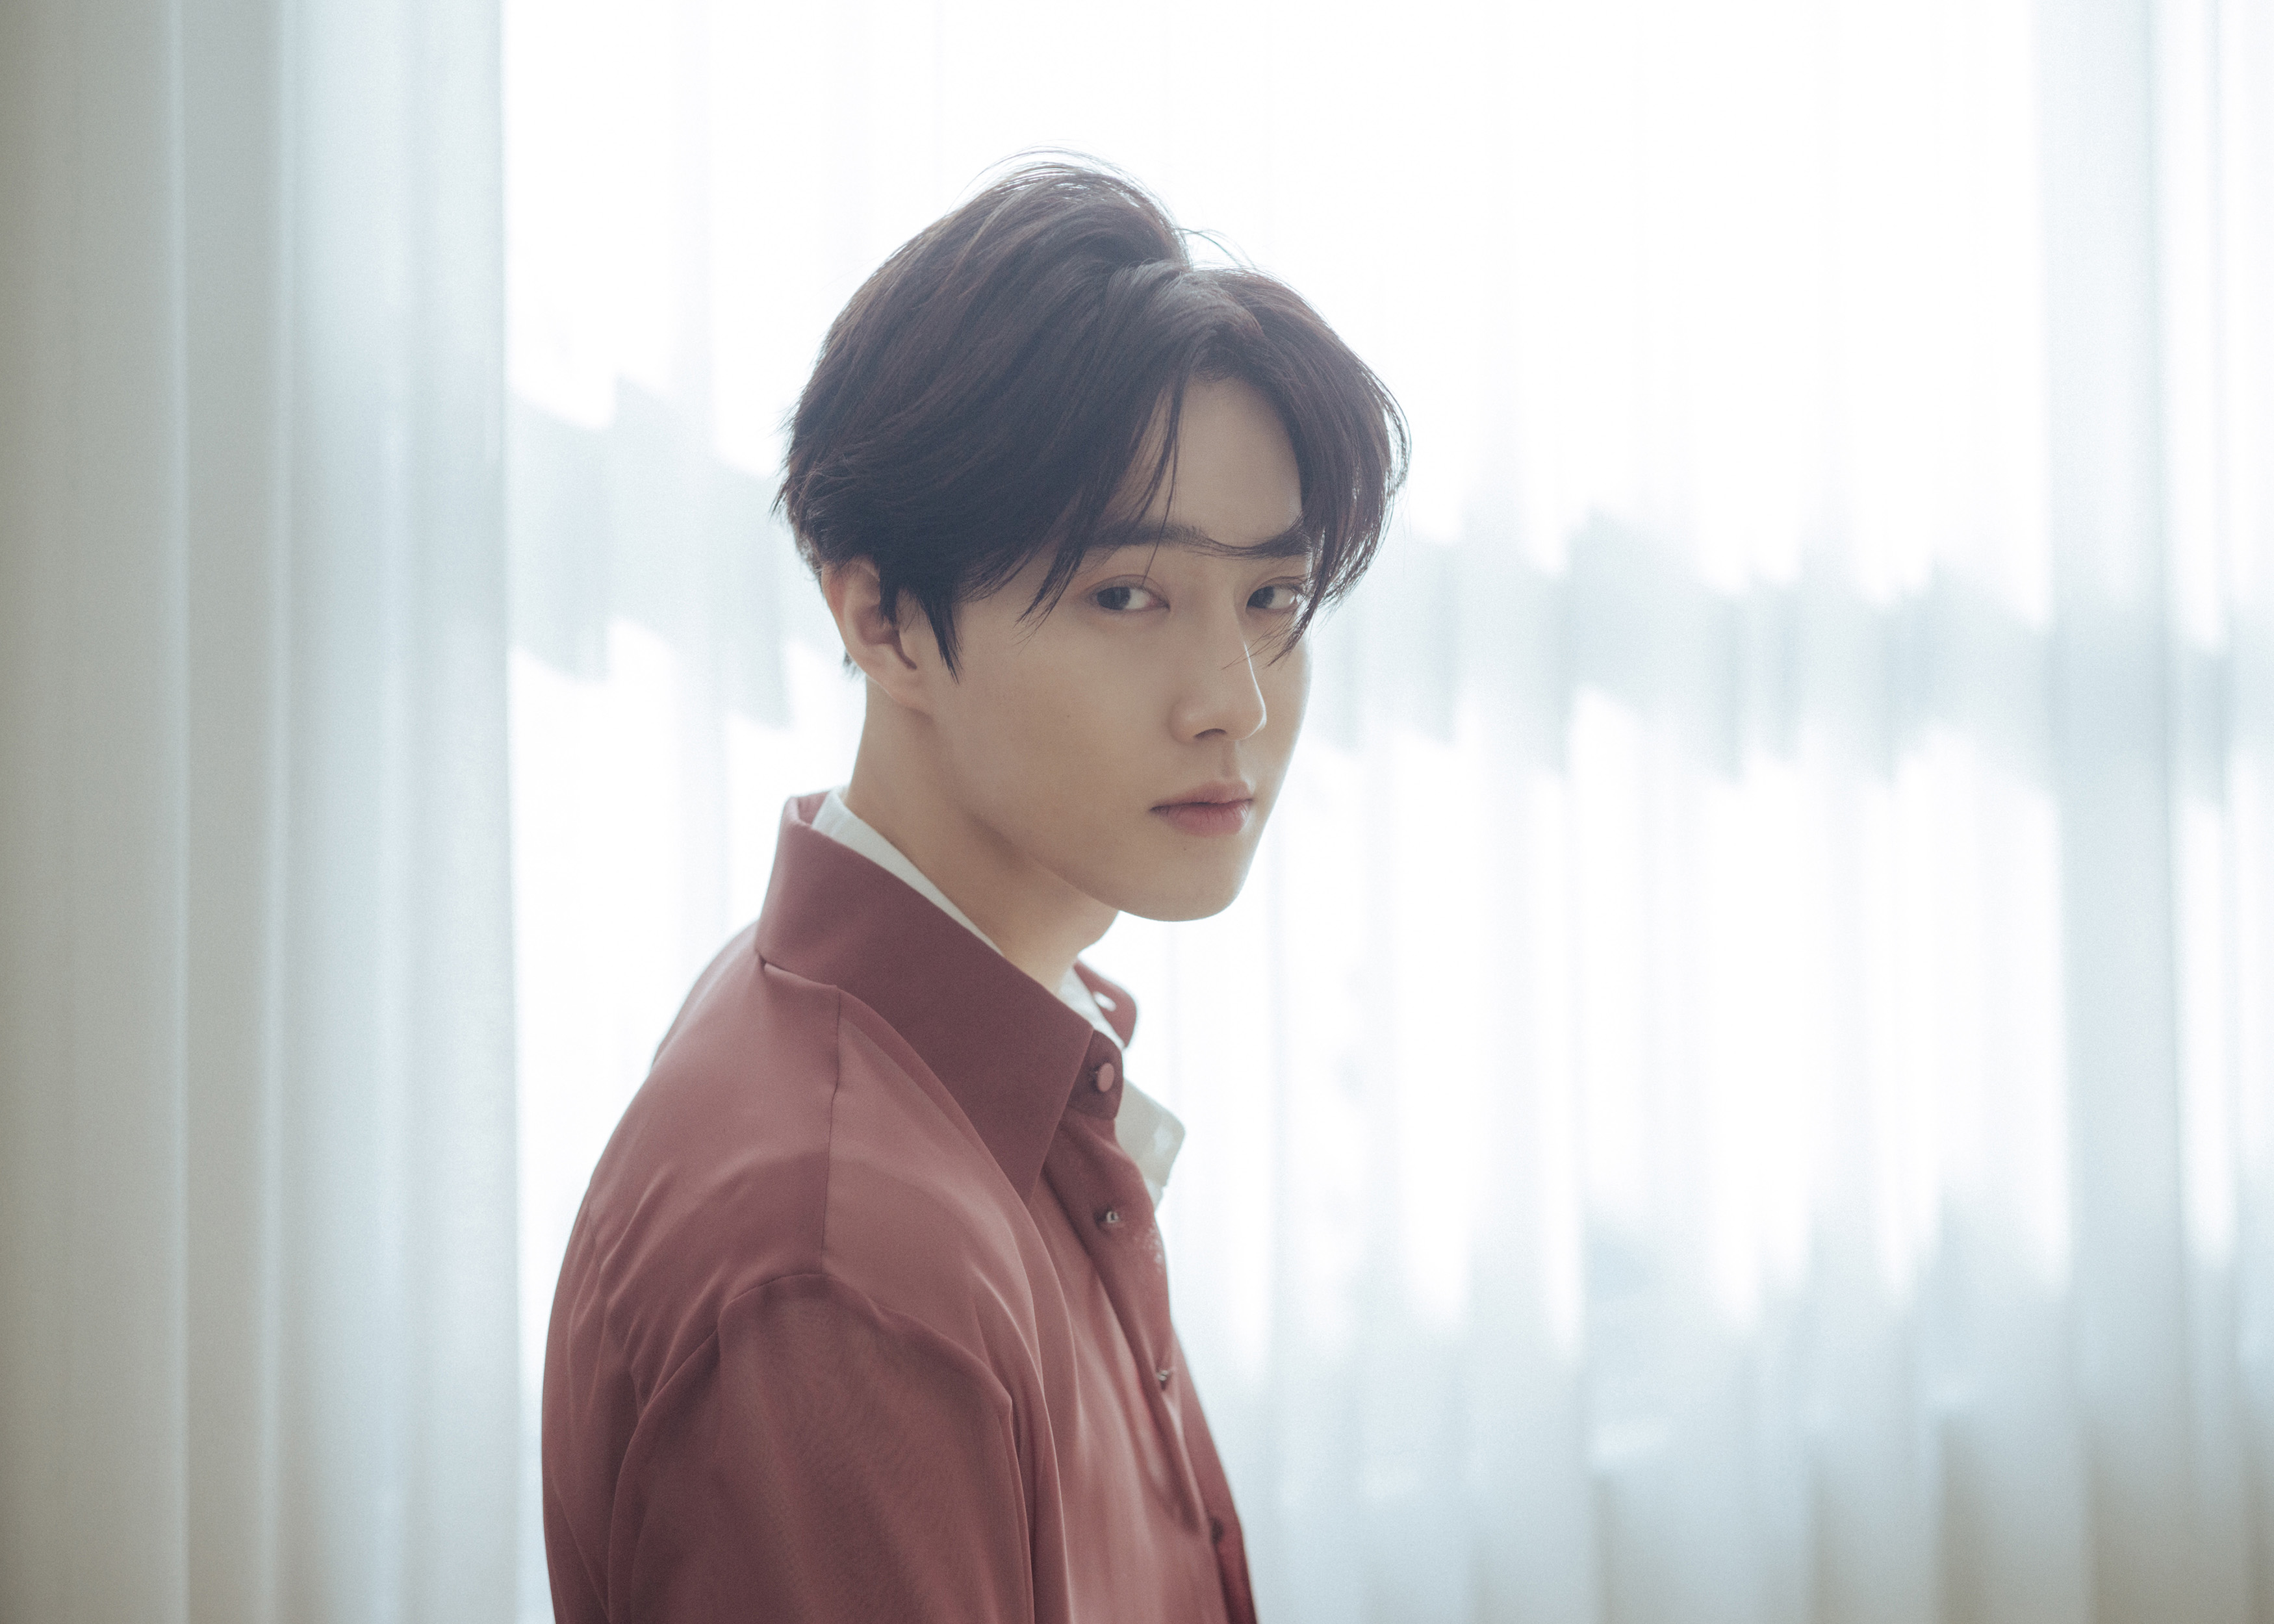 EXO Suho has announced the Enlisted news.On the afternoon of the 4th, Suho wrote a letter in his handwriting, saying, I have been obliged to serve as part of May 14th through the EXO official fan club community.Suho said, I really want to see our EXO-L people. He said, I hope you EXO-L people who think and love me Moy Yat will always be healthy.Suho is set to enter the military training on the 14th; EXOs eldest brother Xiumin was Enlisted on May 7 last year and EXO D.O. on July 1 of the same year.This would result in Suho fulfilling his military duty for the third time among EXO members; Suho will receive basic military training for four weeks, and then serve as a social worker.On the other hand, Suho released his first Solo album Self-Portrait on March 30 and ranked first on the album chart.The title song Love, Haja also gained great popularity, including being ranked No. 1 on the music charts.EXOs Relay Video Recorder - Symposium, which Suho is the main character, can be found on VLIVE and Naver TVs SM C & C STUDIO channels every Tuesday, Thursday and Saturday at 12:00 pm.Hello, this is Suho, our EXO-L.I have something to tell you, so I wrote this today.I soon became a member of the military service on May 14th. Im sure well miss EXO-L all of you.Moy Yat I hope you are healthy all the time, EXO-L who cares and loves me. I really appreciate it and love you.WE ARE ONE EXO Lets love it.iMBC Kim Hye-young  Photo SM Entertainment, SM C & C STUDIO